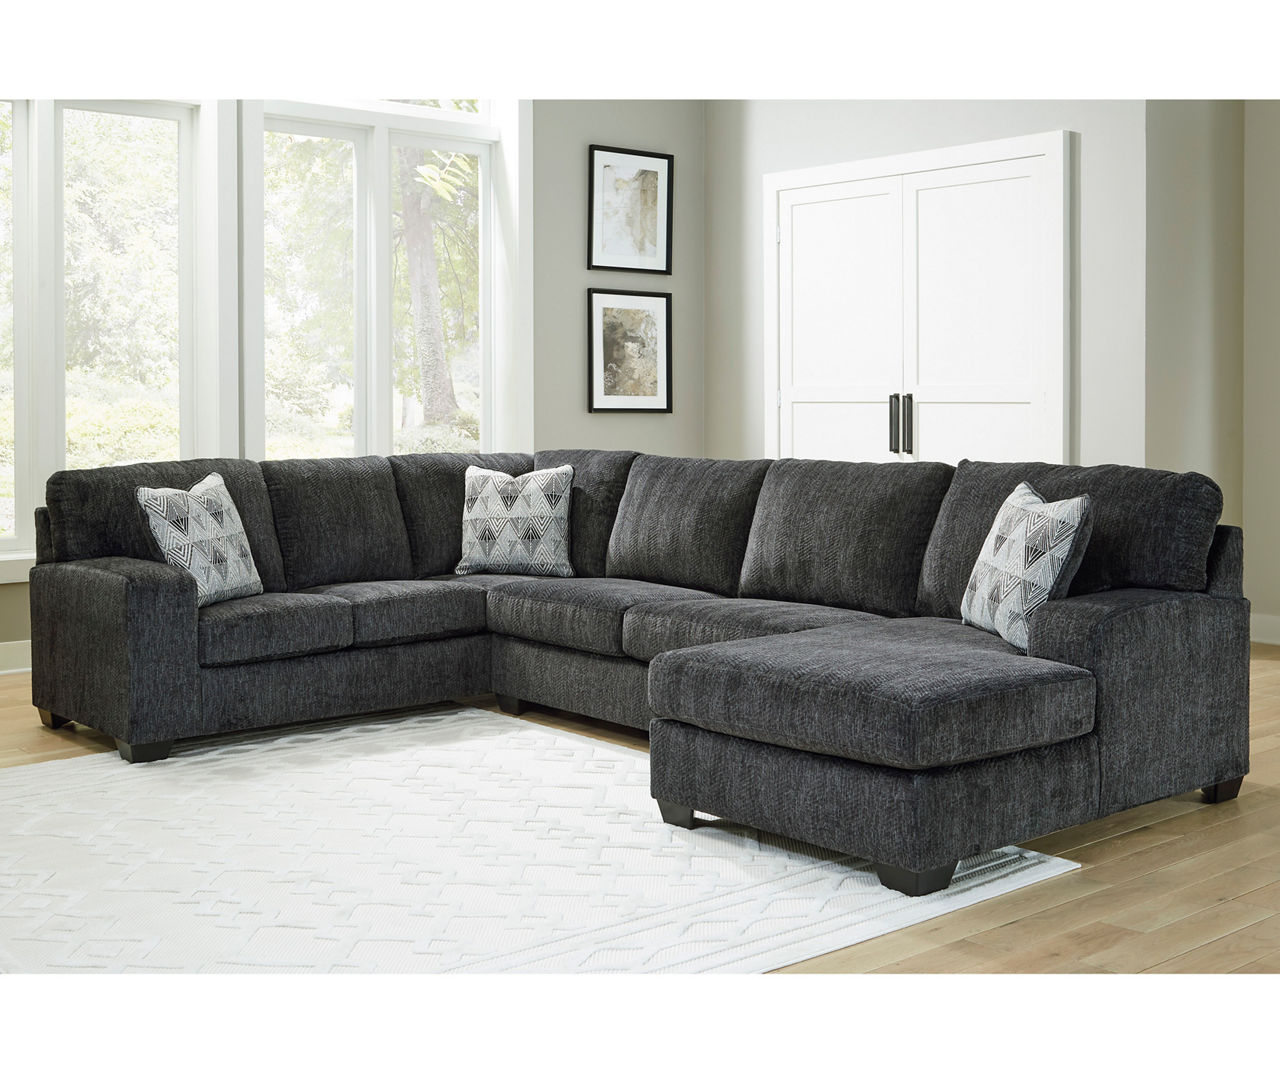 Broyhill Hollyview Shadow 3-Piece Sectional